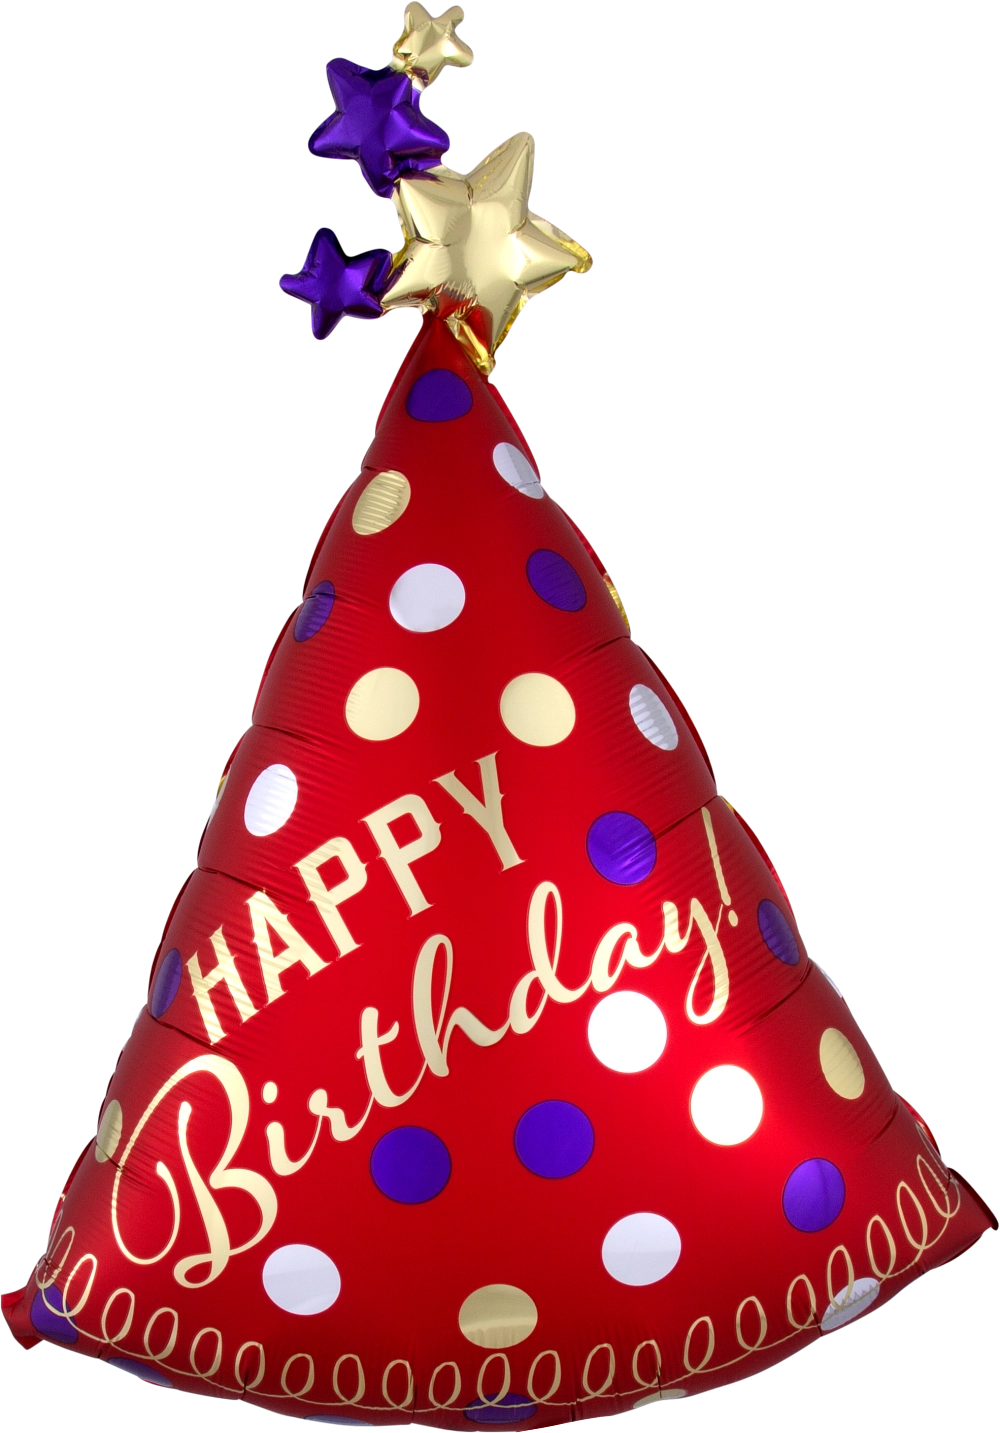 Happy Birthday Red Satin Party Hat - SuperShape